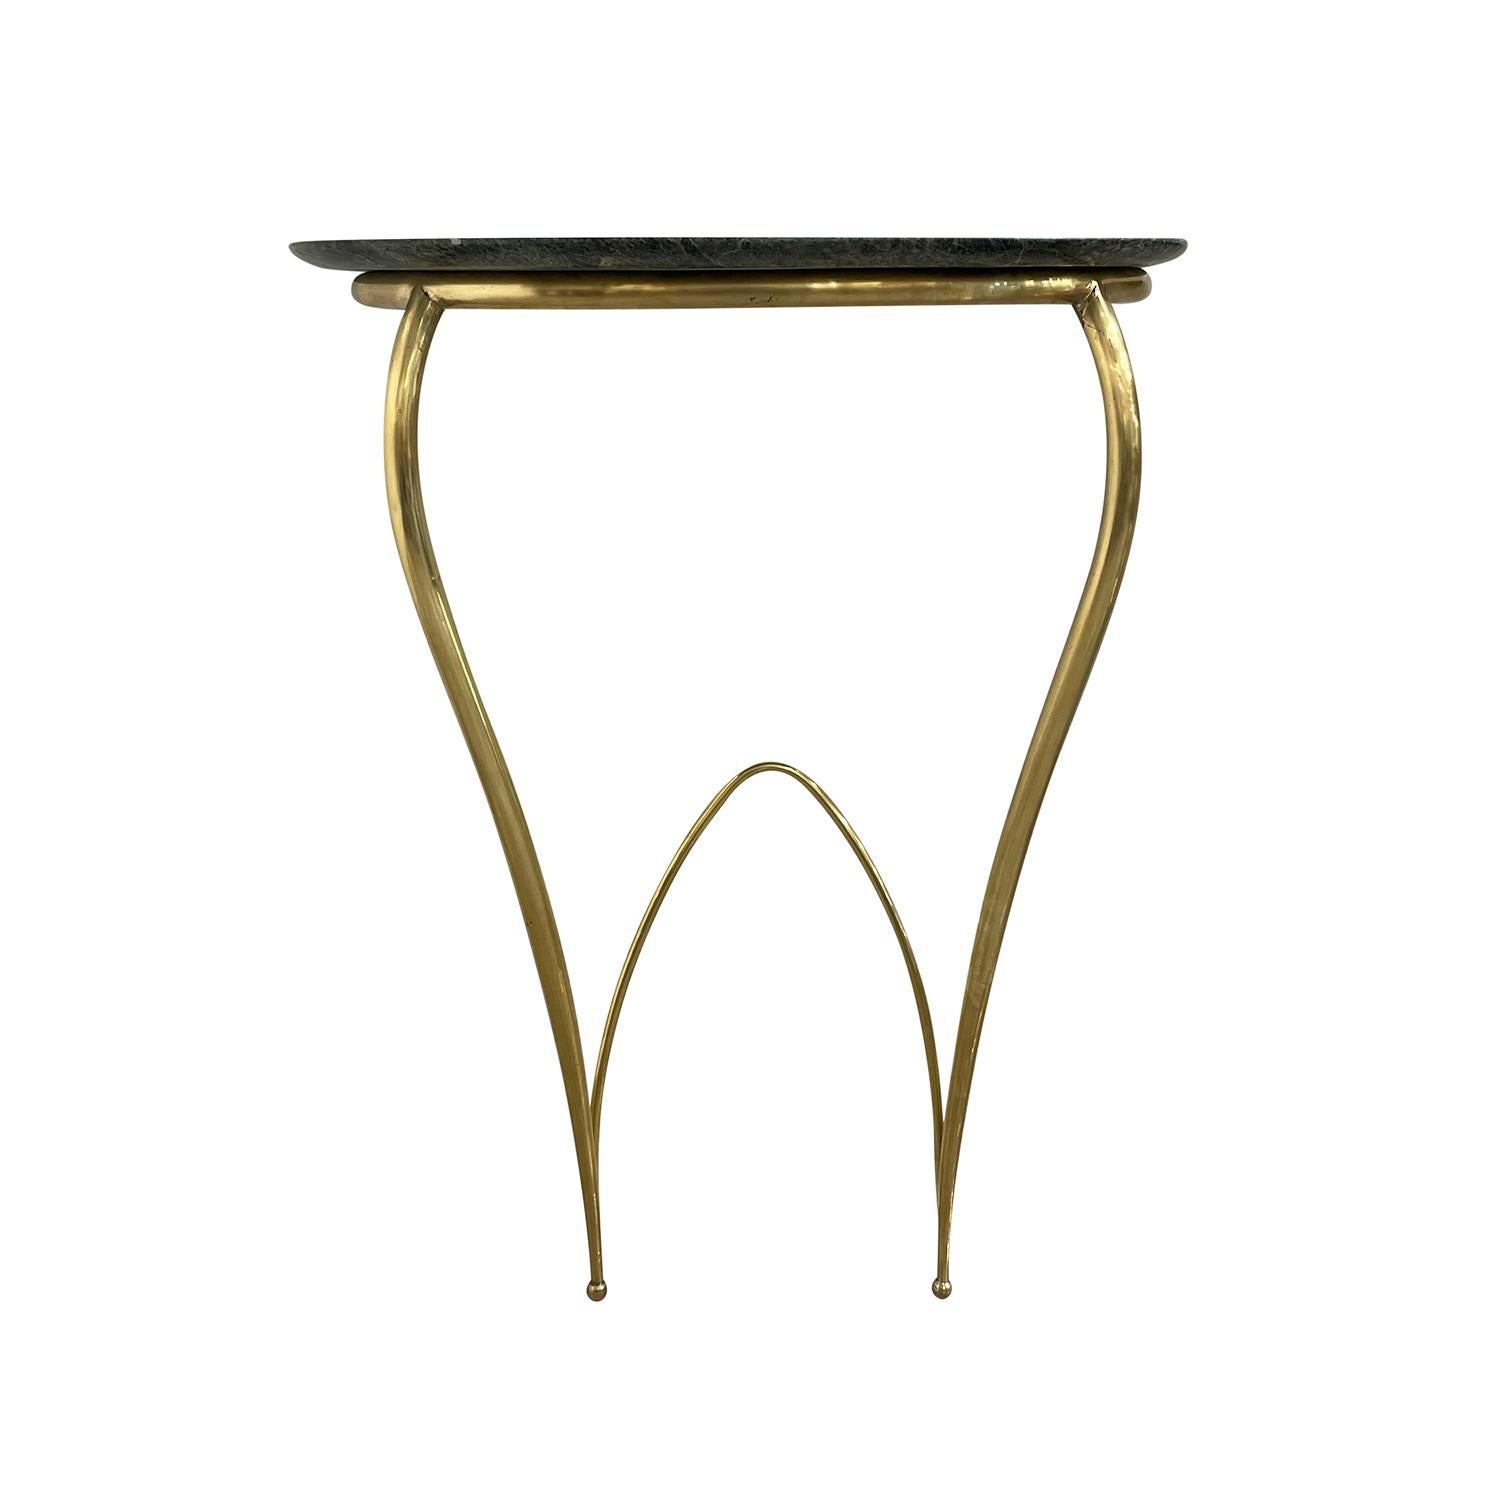 A half round, vintage Mid-Century modern Italian pair of wall mounted console tables made of hand crafted metal, brass with a green Belgian marble top, in good condition. The demi-lune end, side tables are standing on two sculptural legs, designed